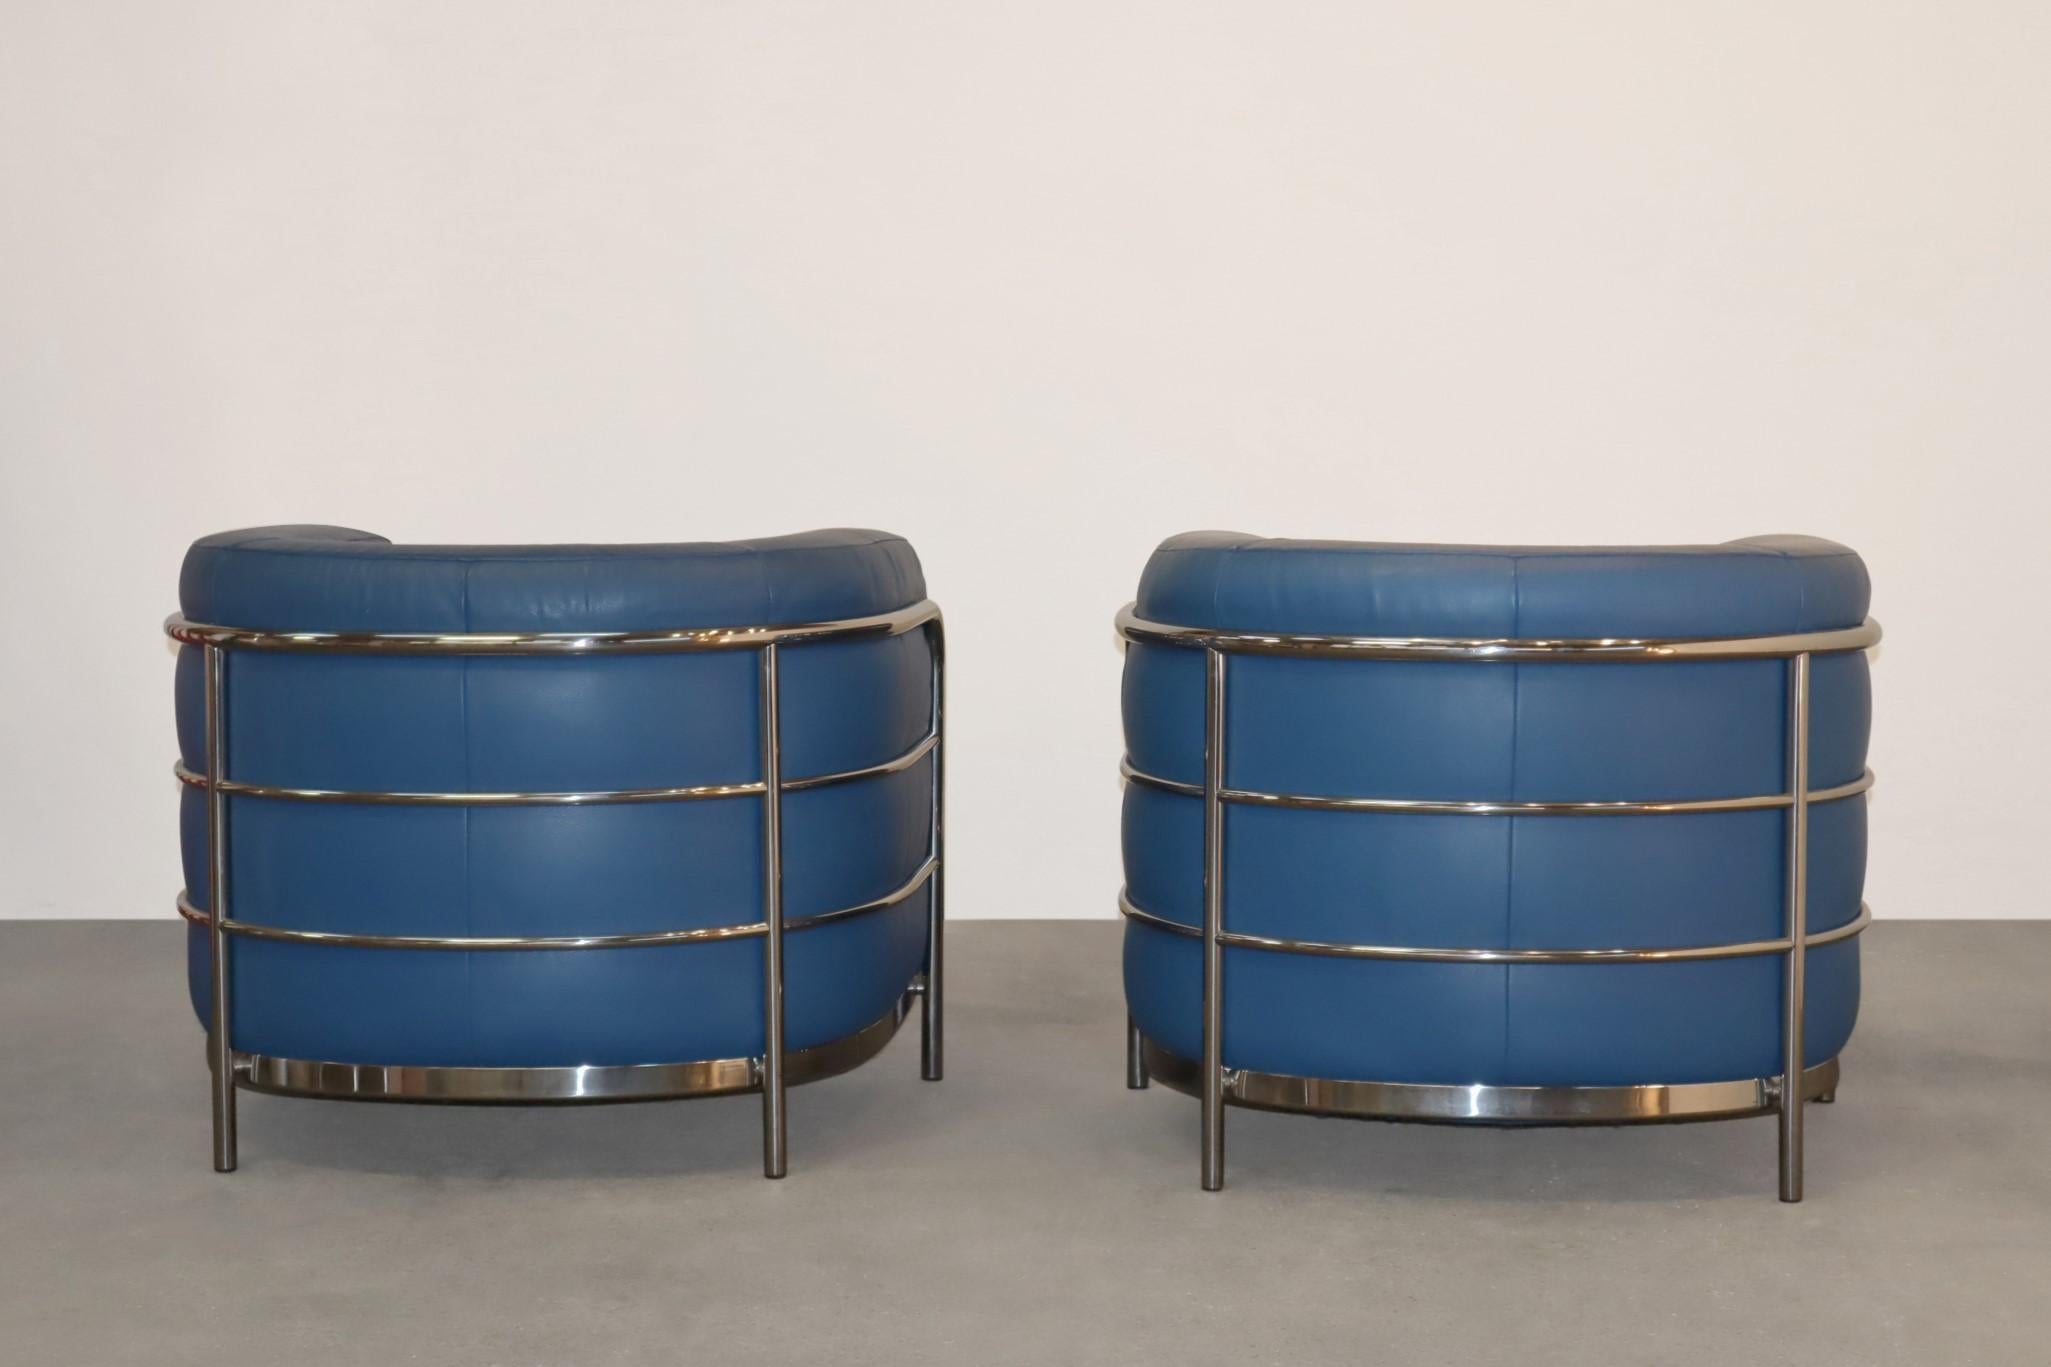 Zanotta Onda Pair of Armchairs in Blue Leather by De Pas, D'urbino For Sale 3